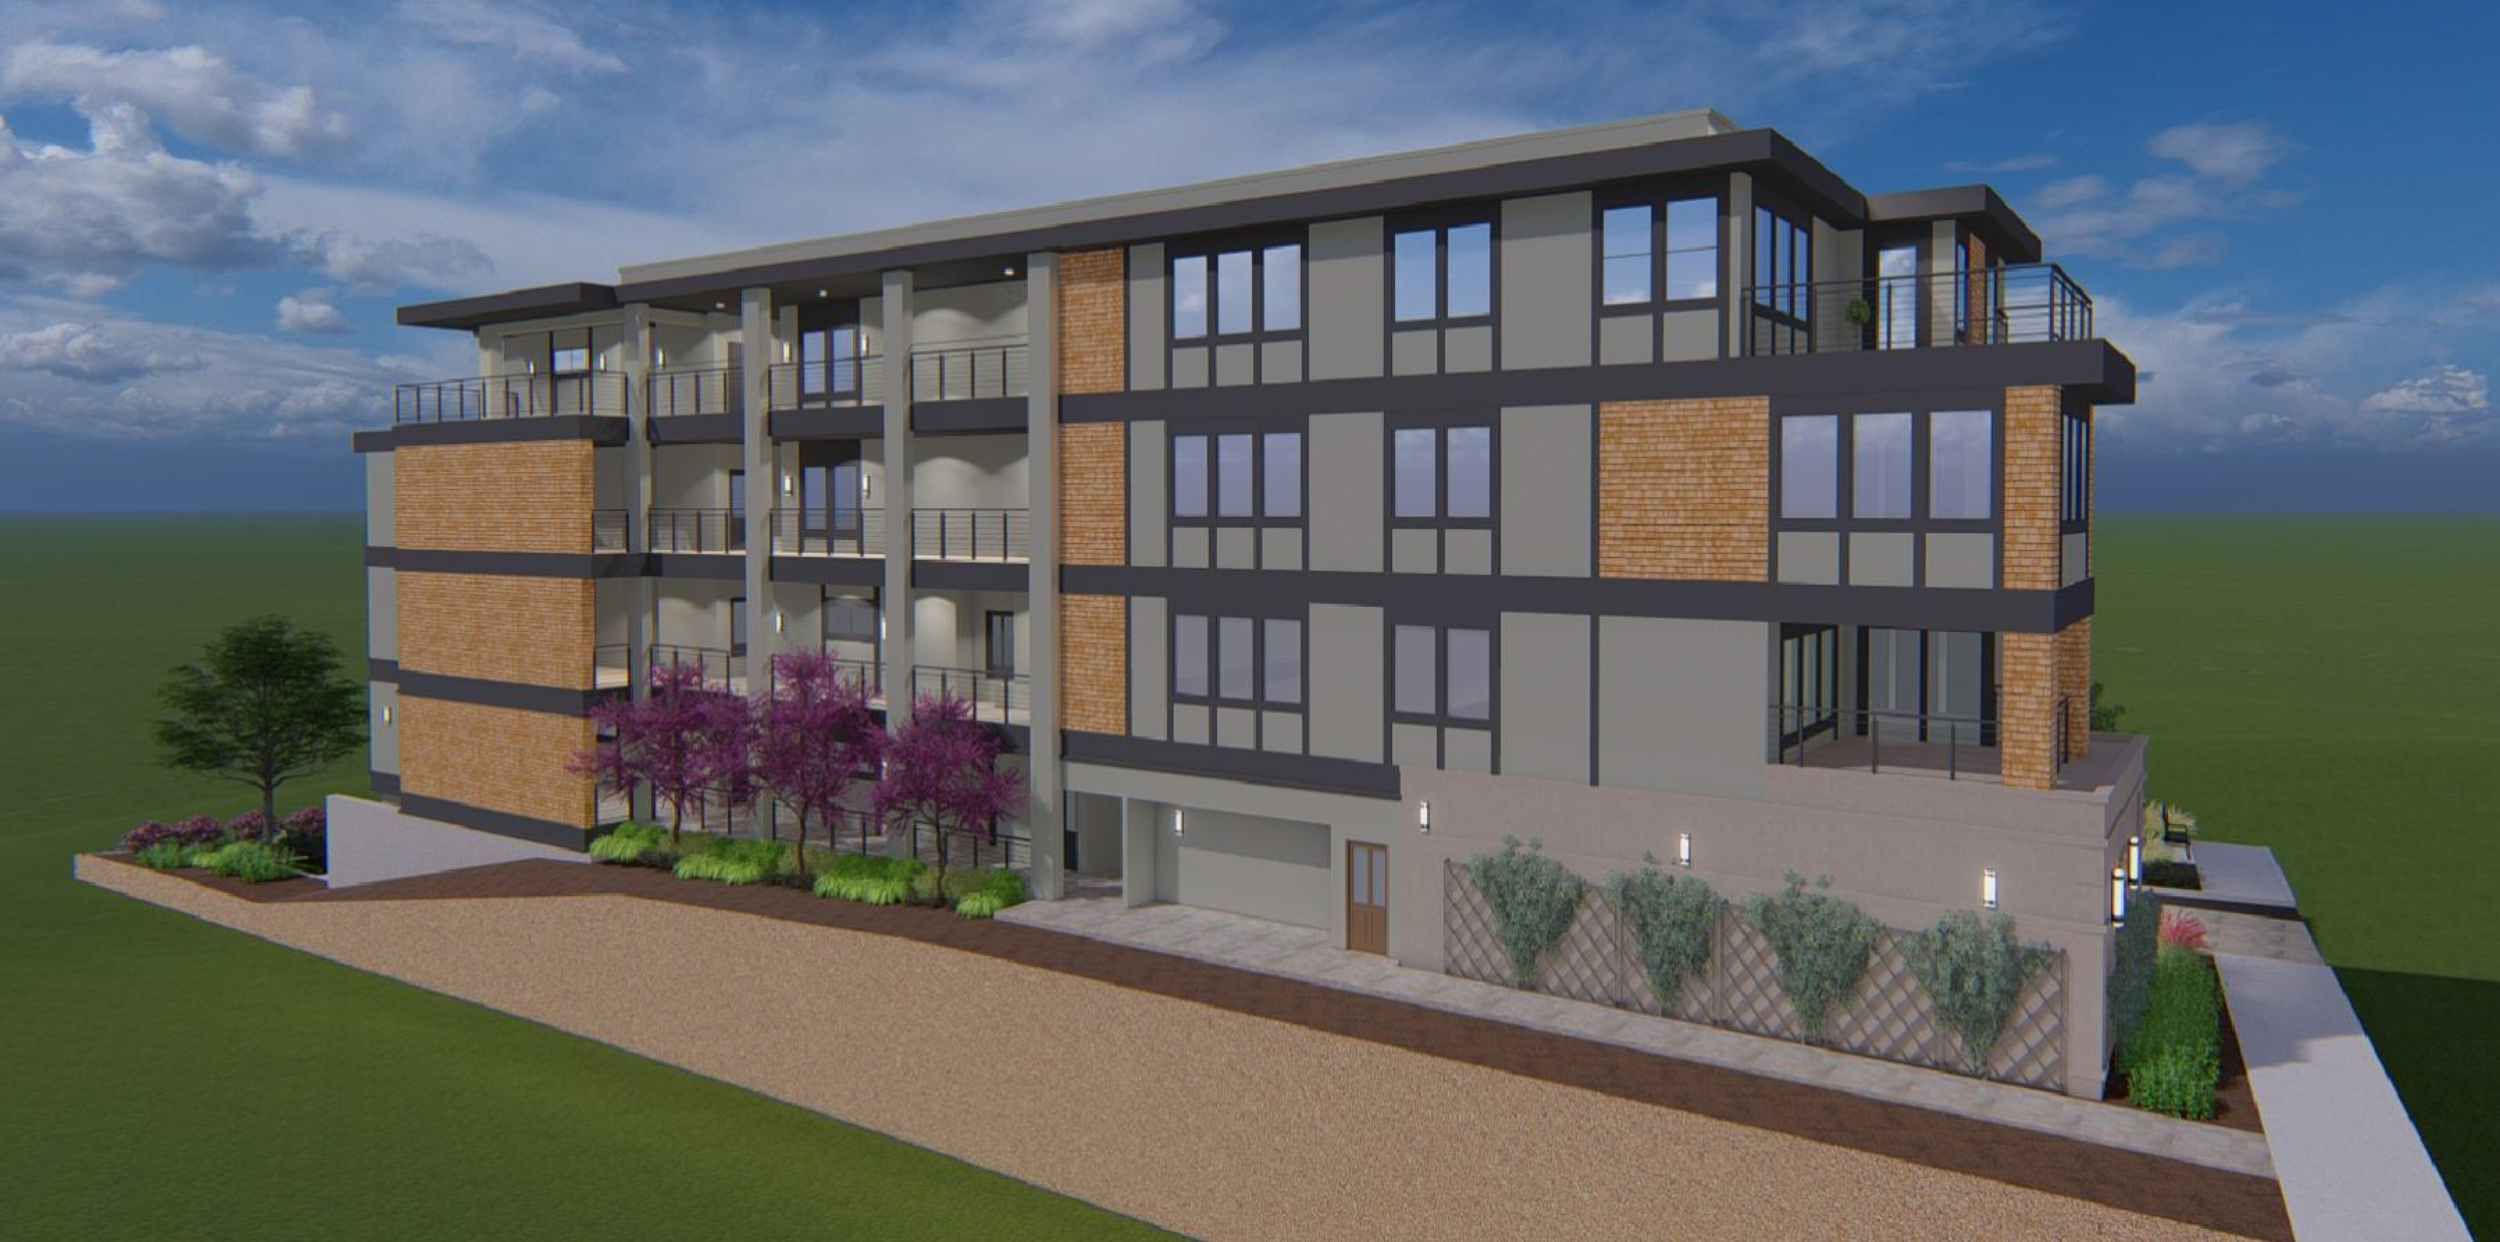 3721 Mount Diablo Boulevard side view, rendering by HDO Architects and Planners